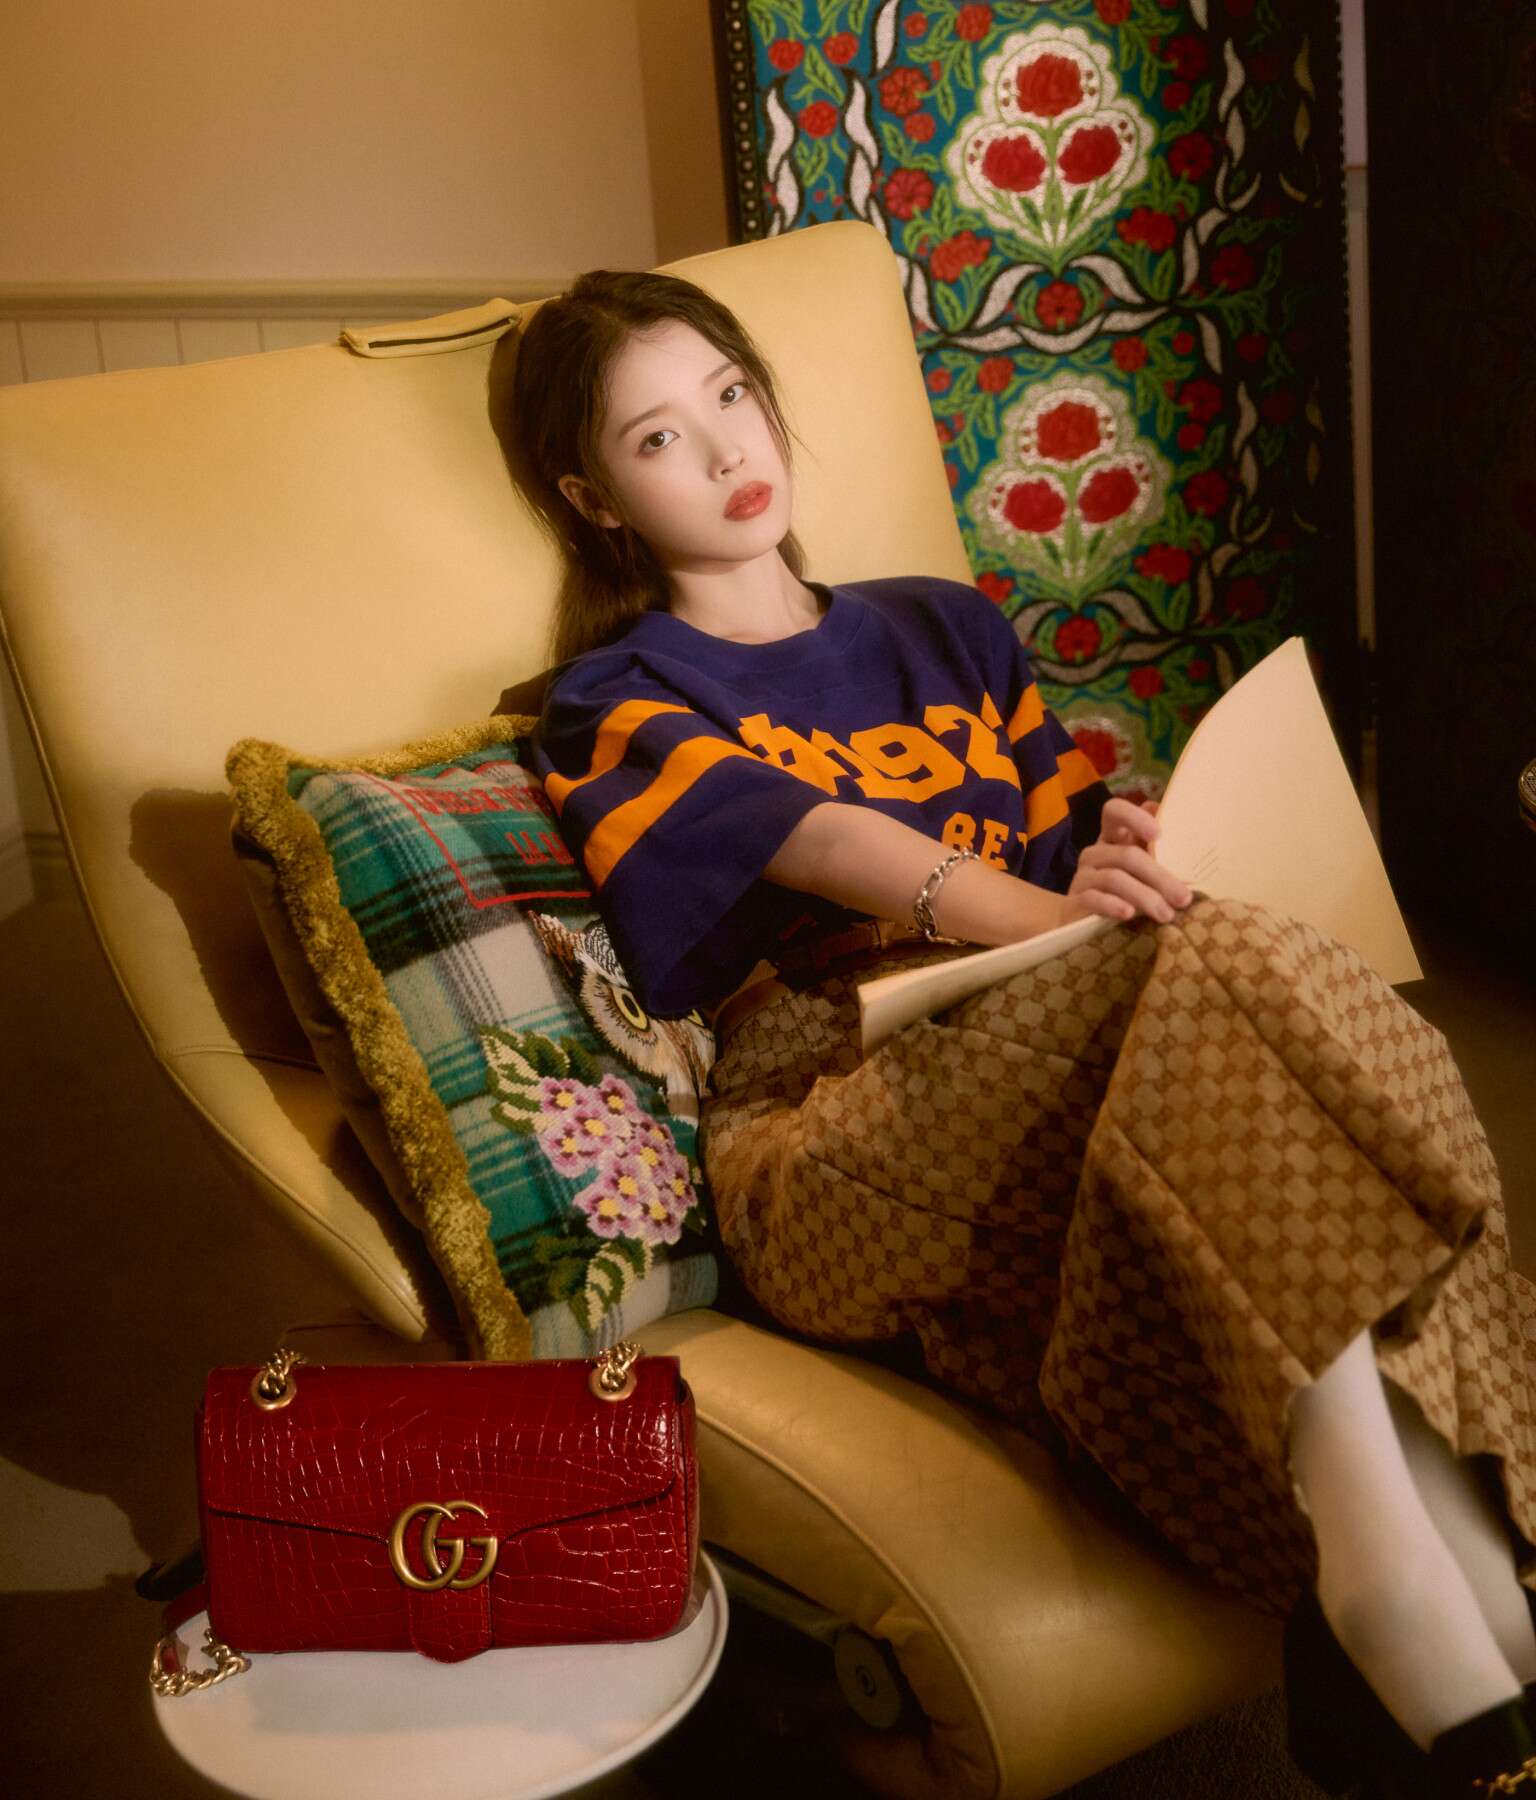 Mina Shin and Jungjae Lee appointed the latest Global Brand Ambassadors of  Gucci